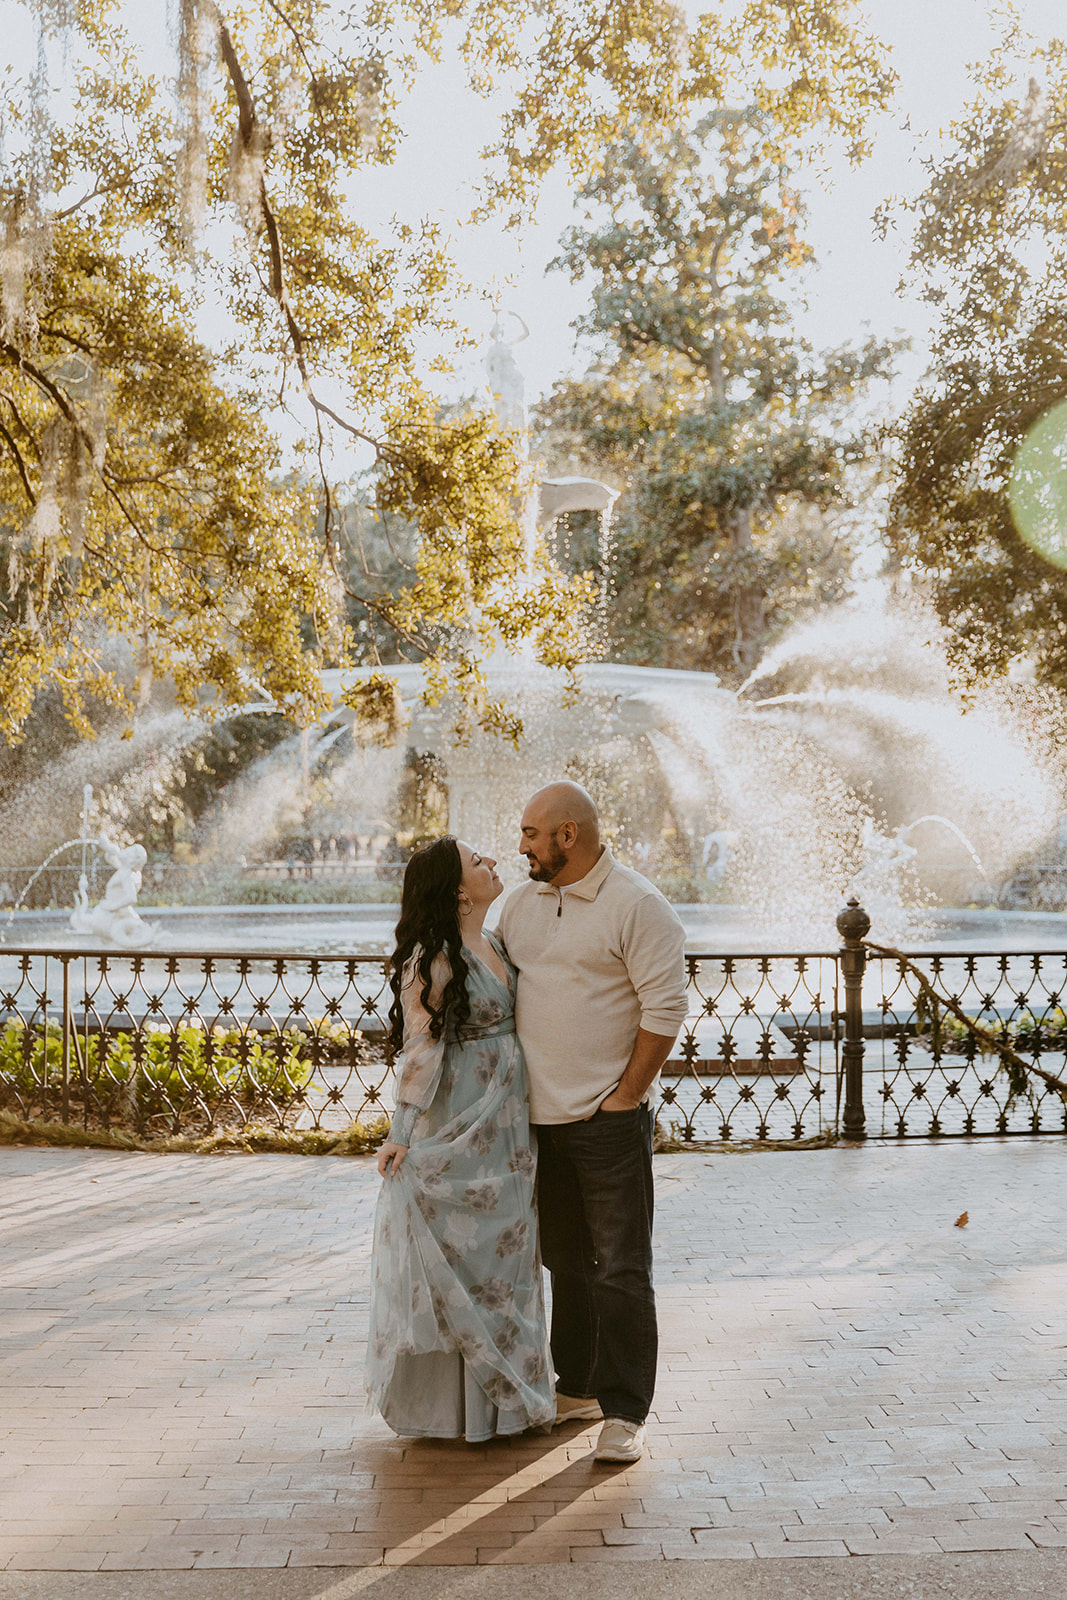 A man and a woman with long dark hair outdoors in a garden-like setting during their engagement session